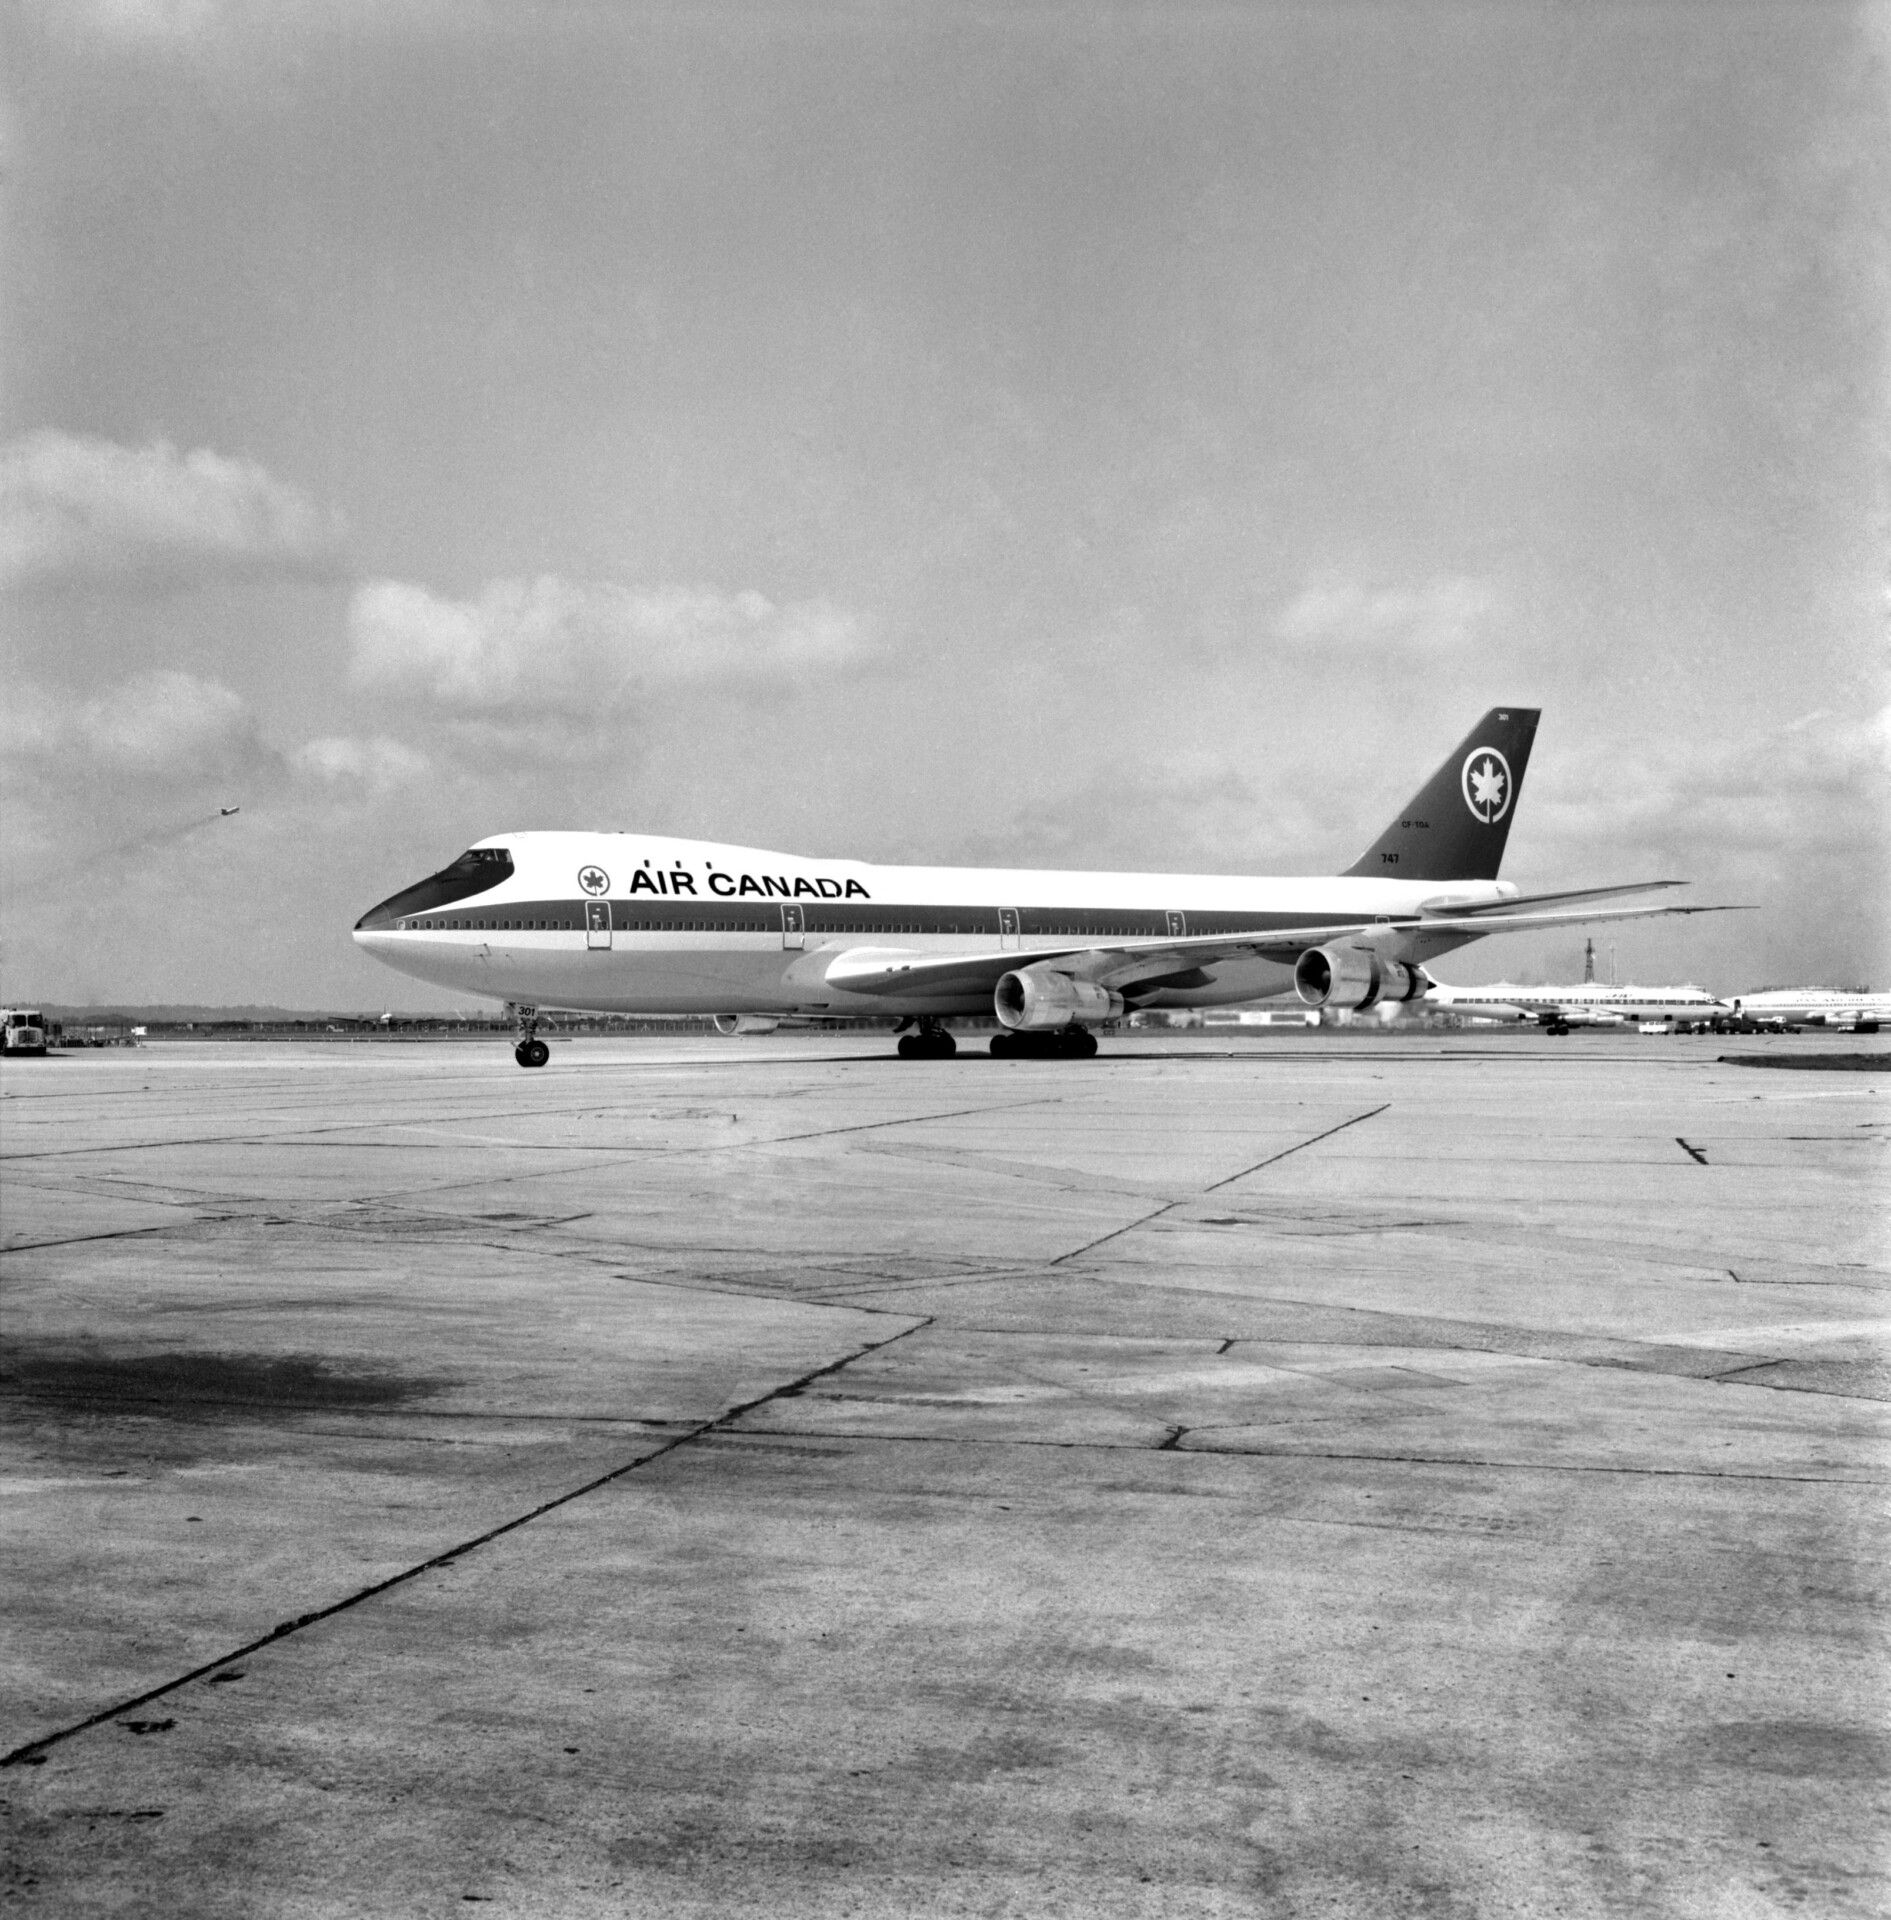 Air Canada's first Model 747 entered service at the end of April 1971. It flew between Vancouver, British Columbia, and Toronto, Ontario